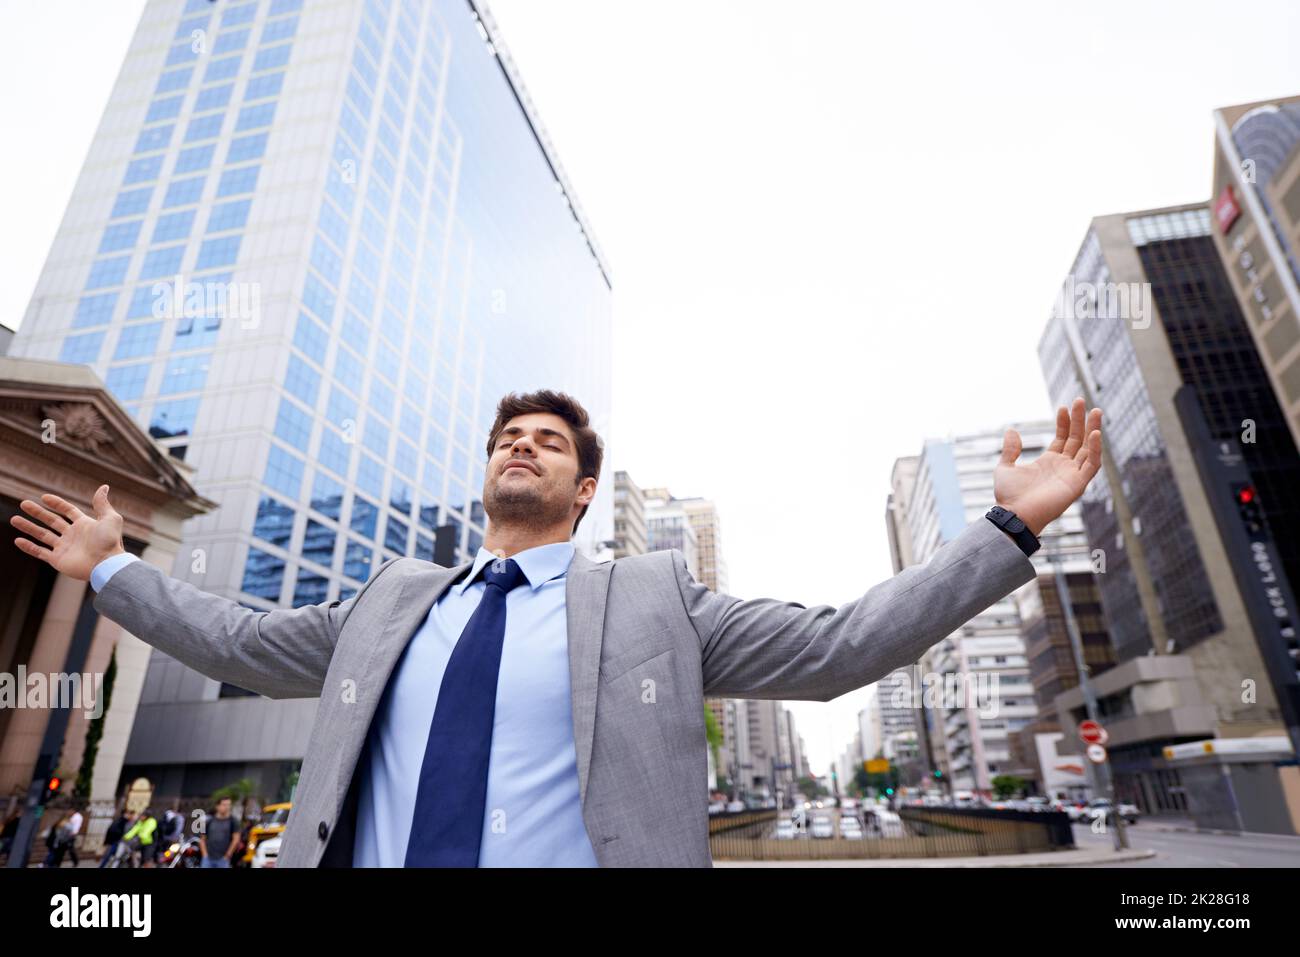 Theres no place like the city. A contented young businessman standing in the city with his eyes closed and his arms raised. Stock Photo